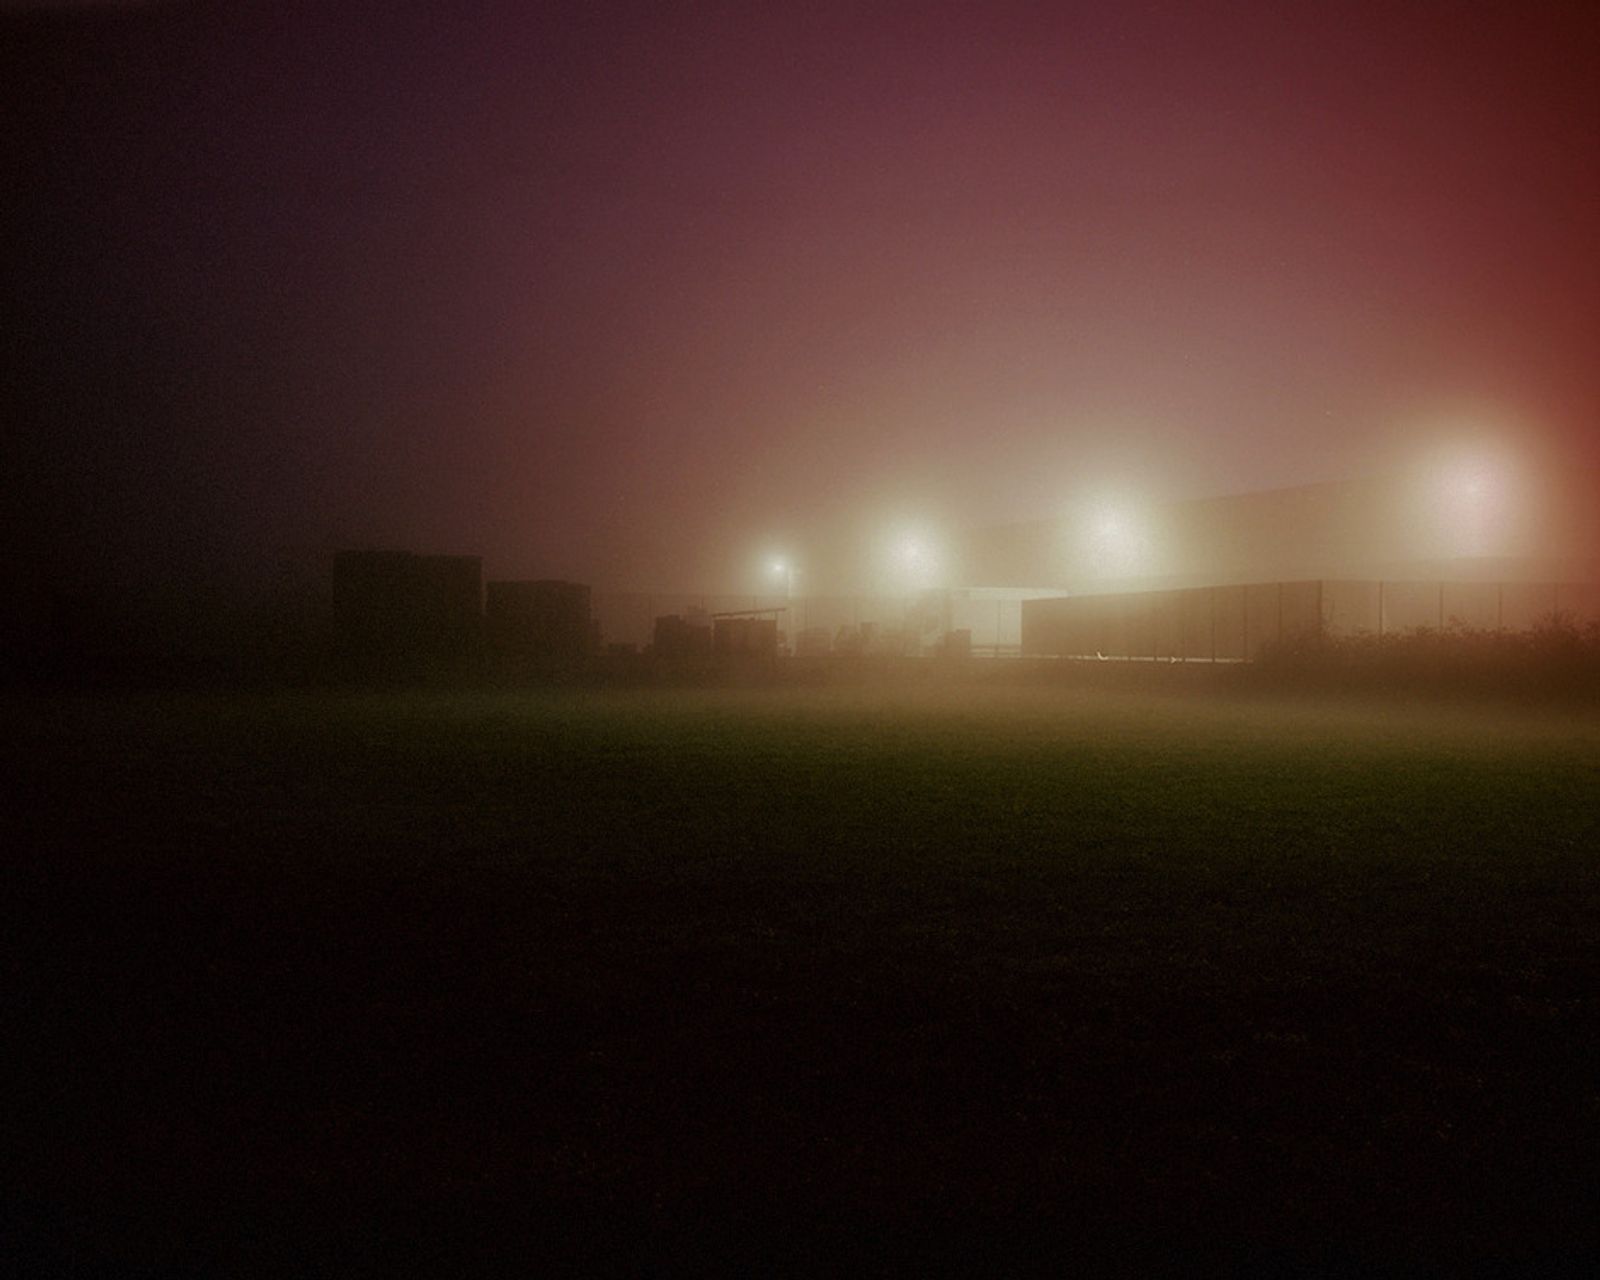 © Matteo Malvino - Image from the The New Countryside photography project